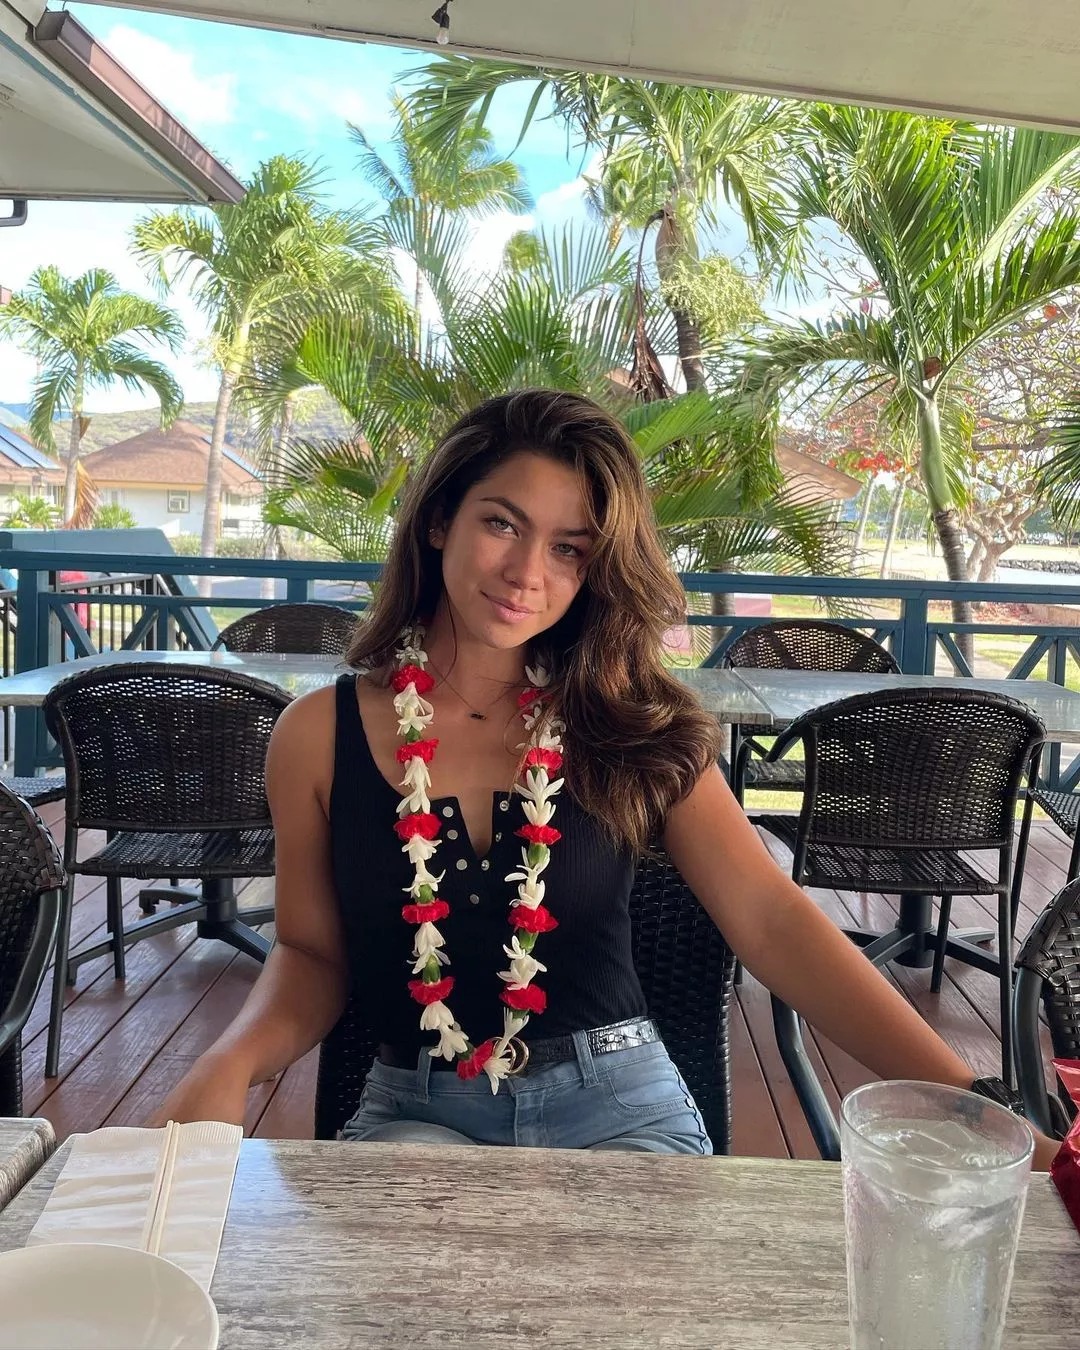 Kamalani posing in a restaurant and wearing black top blue jeans. She is also wearing a flower garland.